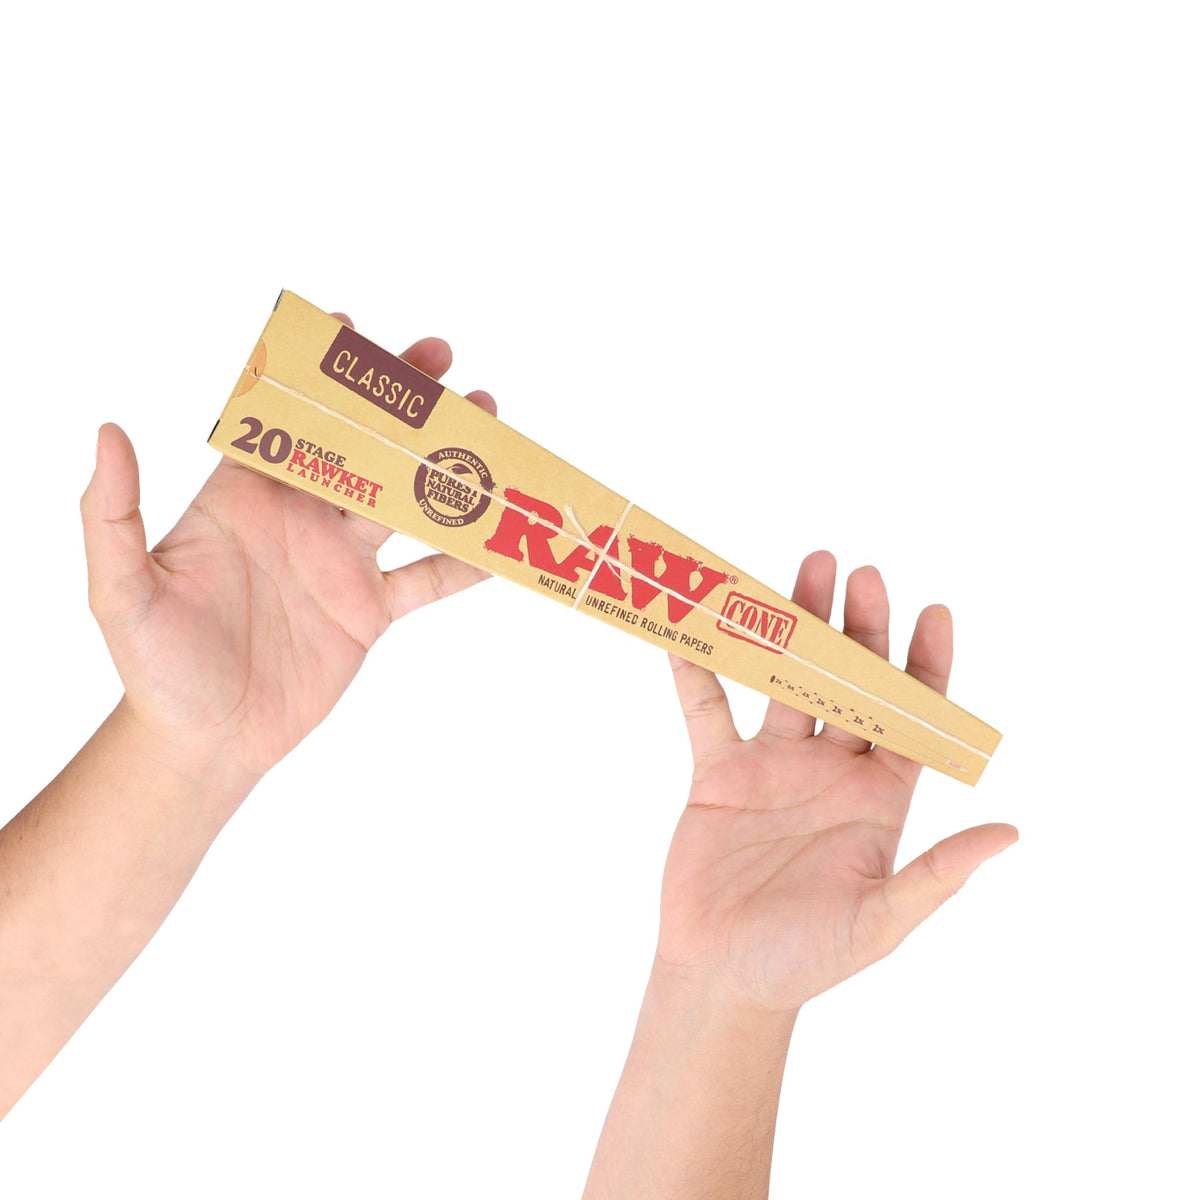 RAW 20 Stage RAWket Launcher Pack RAW Cones esd-official